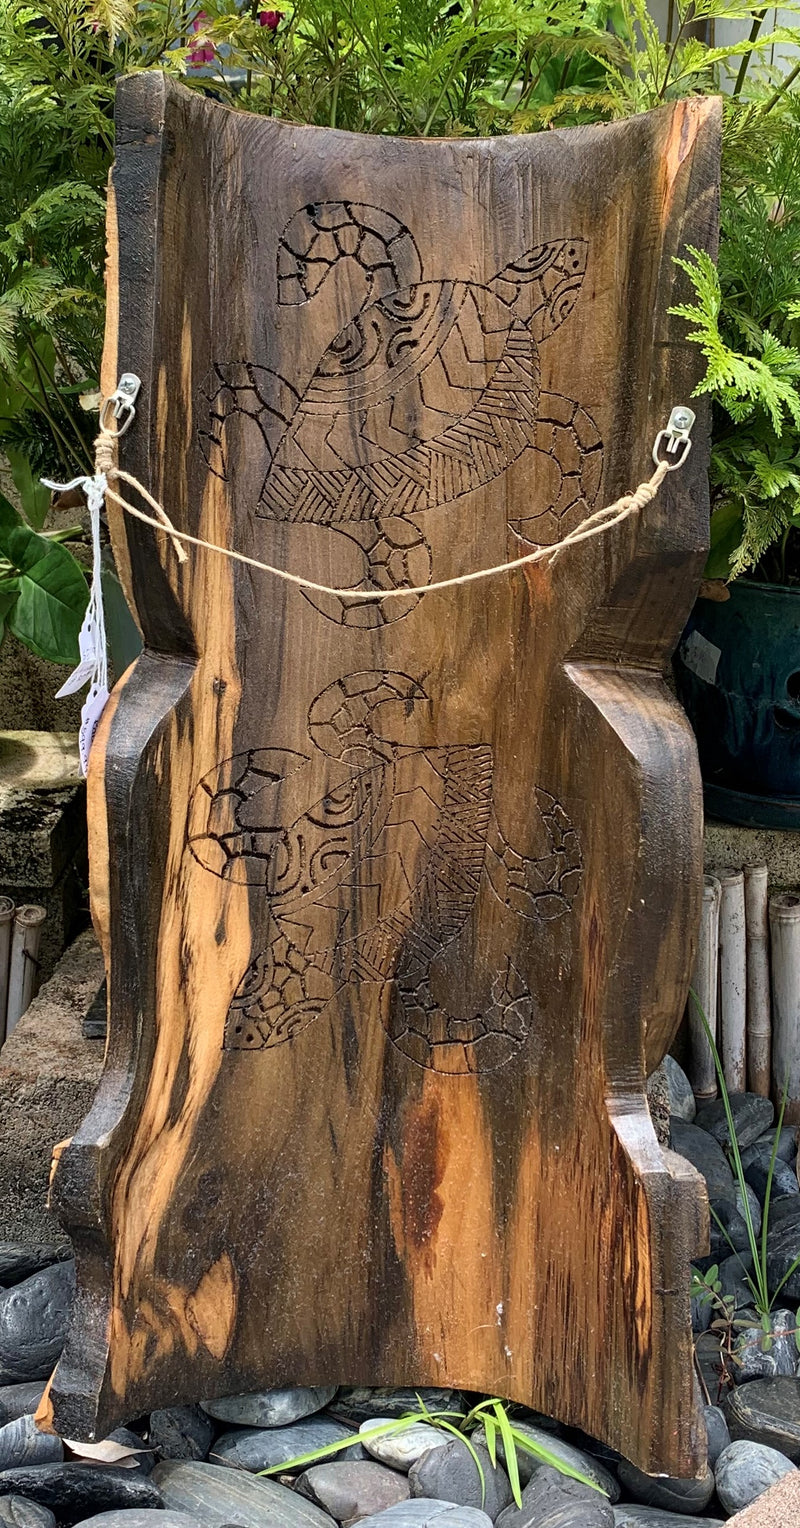 Tiki - Voyager Protector with a Honu (turtle)